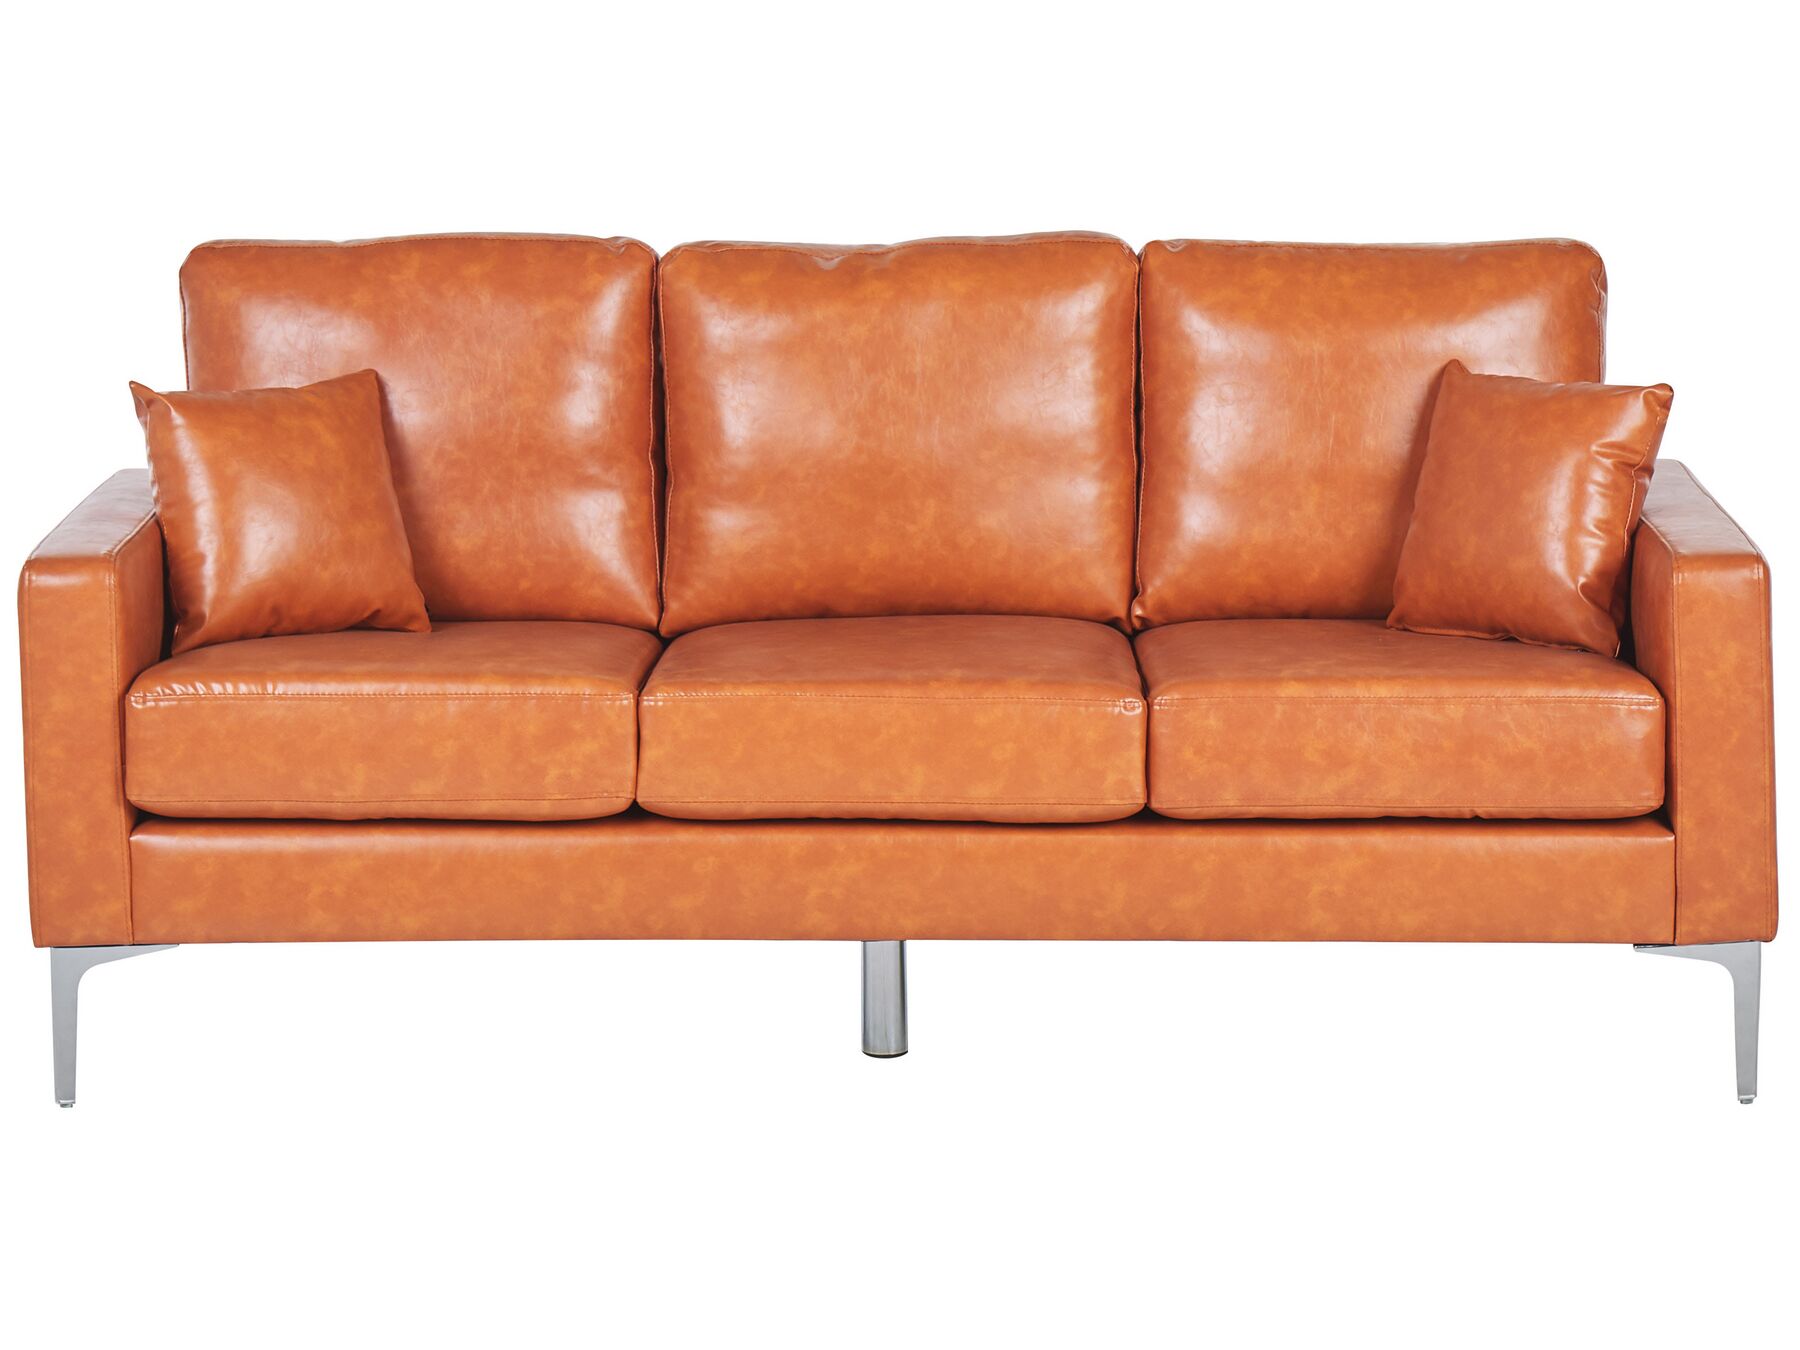 3 Seater Faux Leather Sofa Brown GAVLE_815707